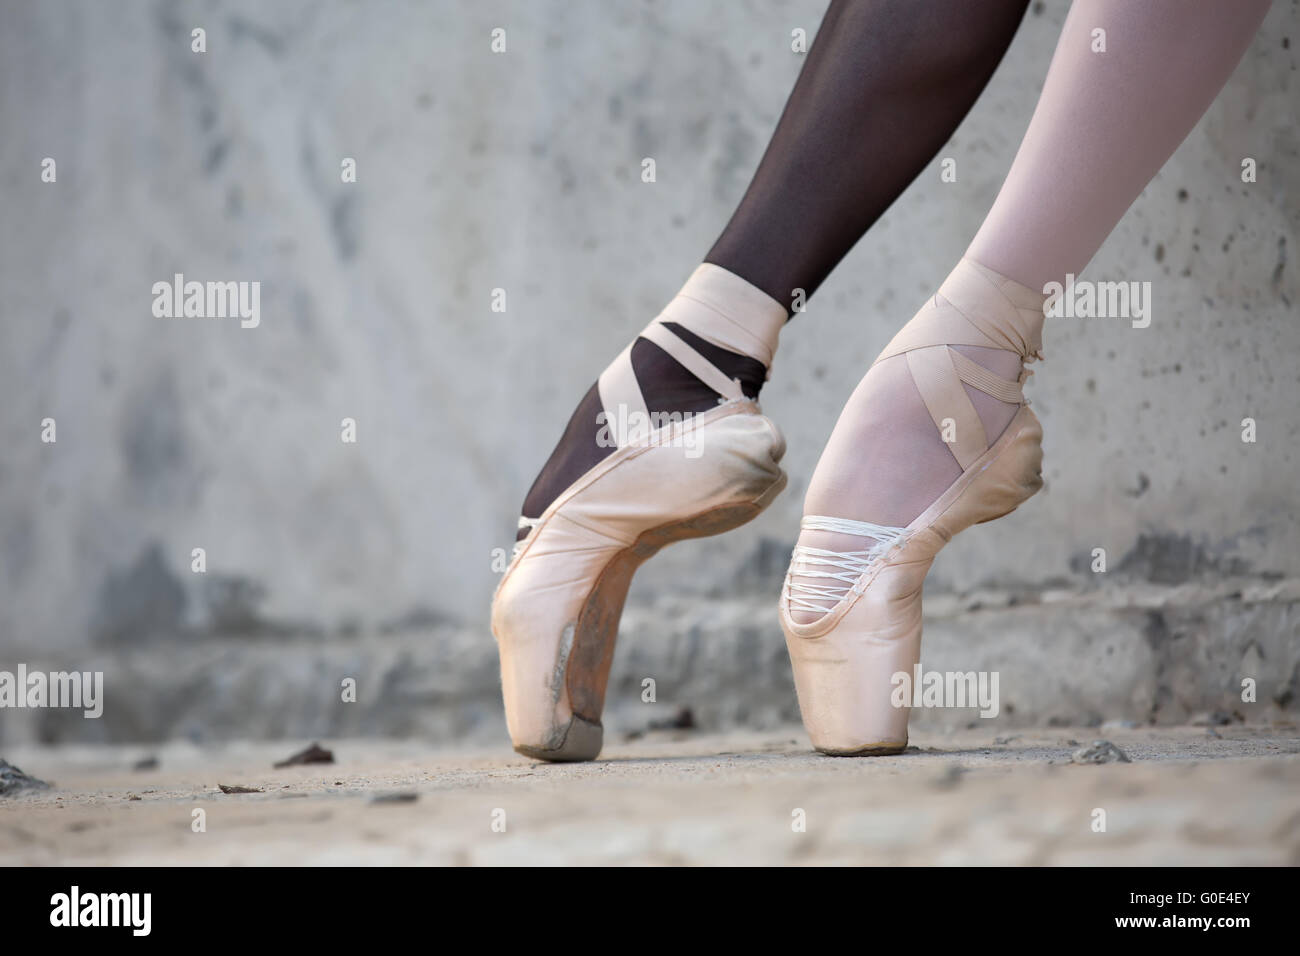 Ballerina feet close-up on a background of textured concrete wal Stock Photo